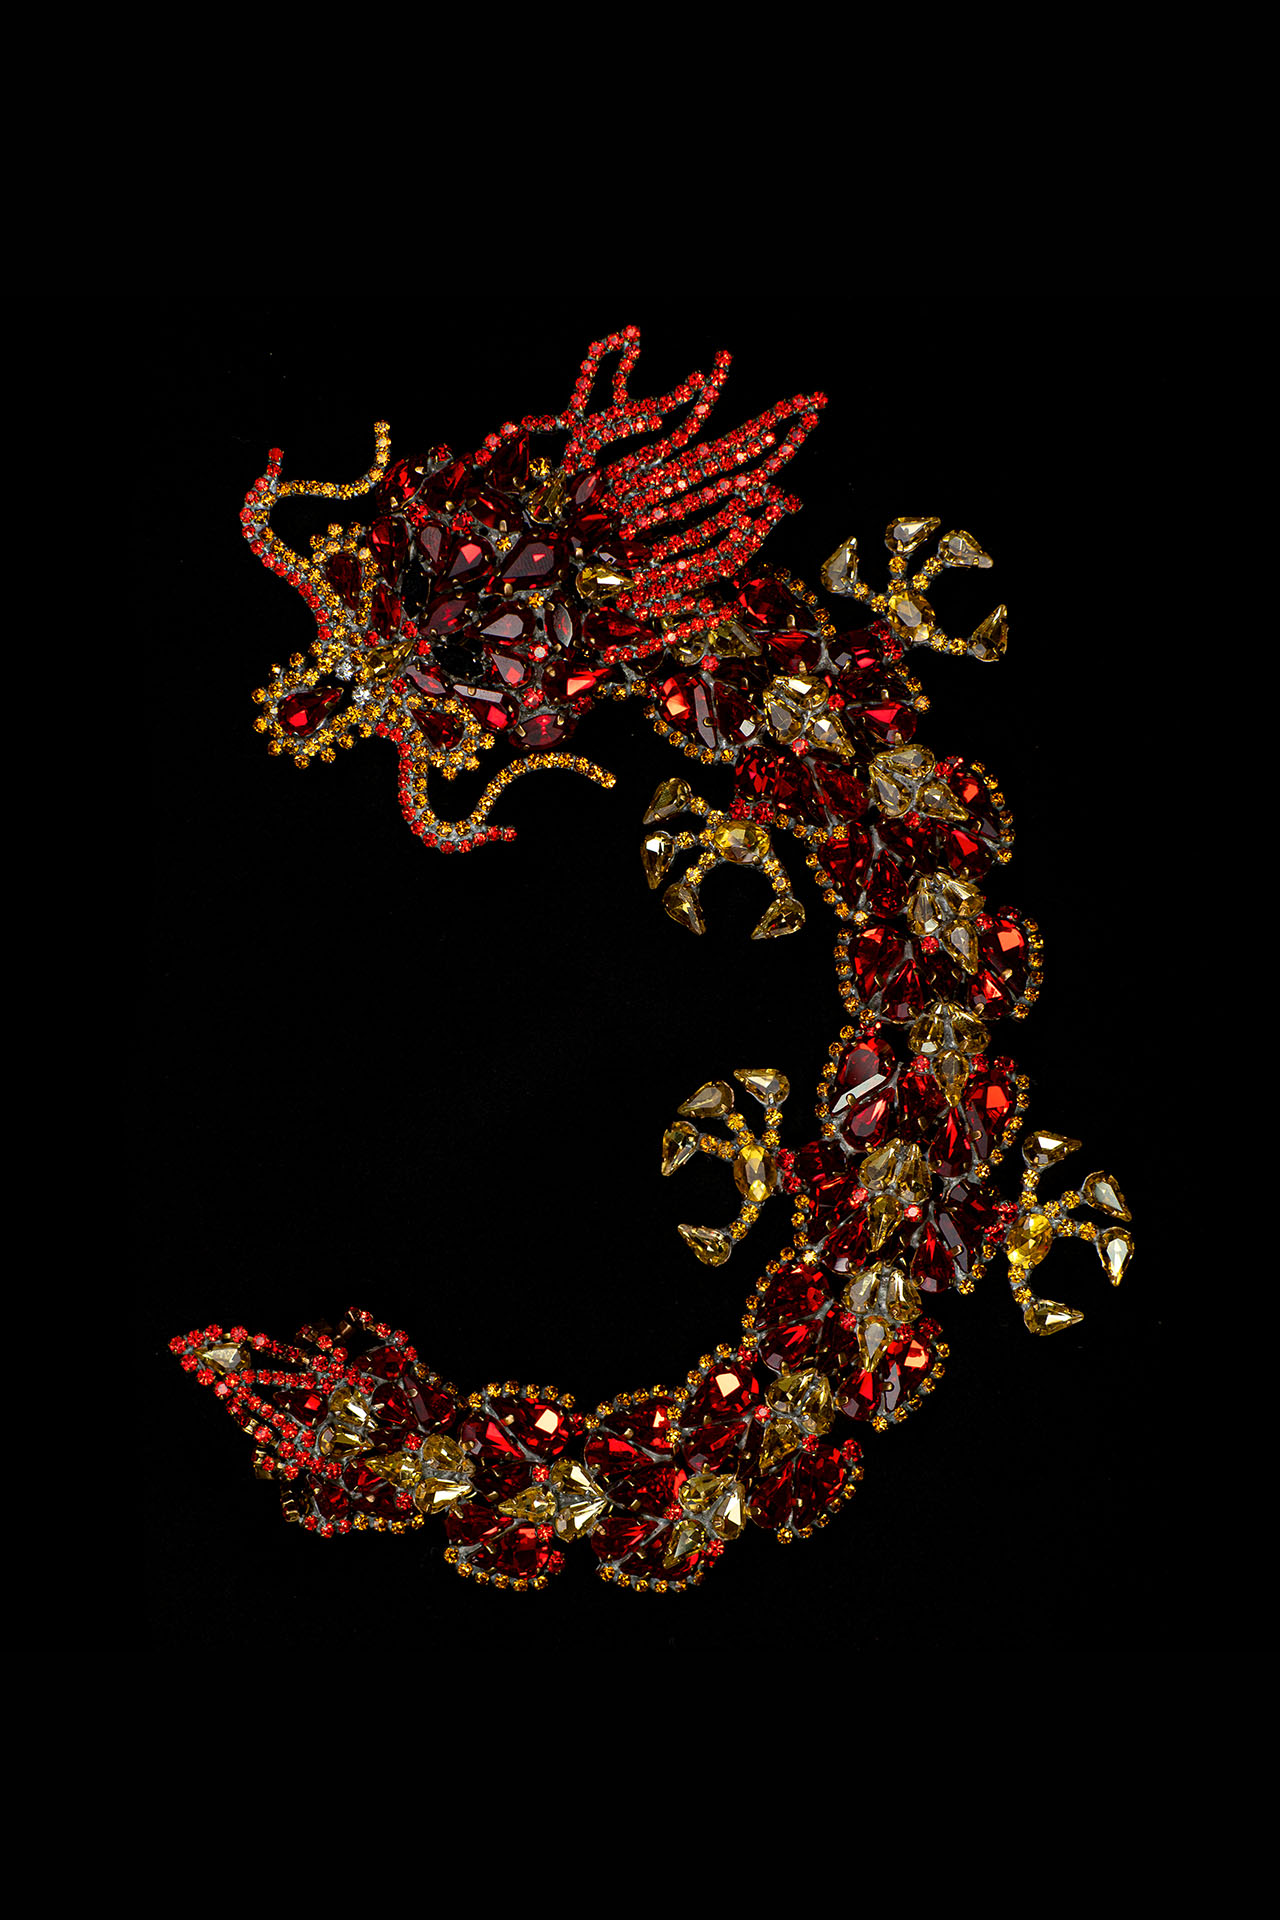 Handmade rhinestone brooch with a red Chinese dragon